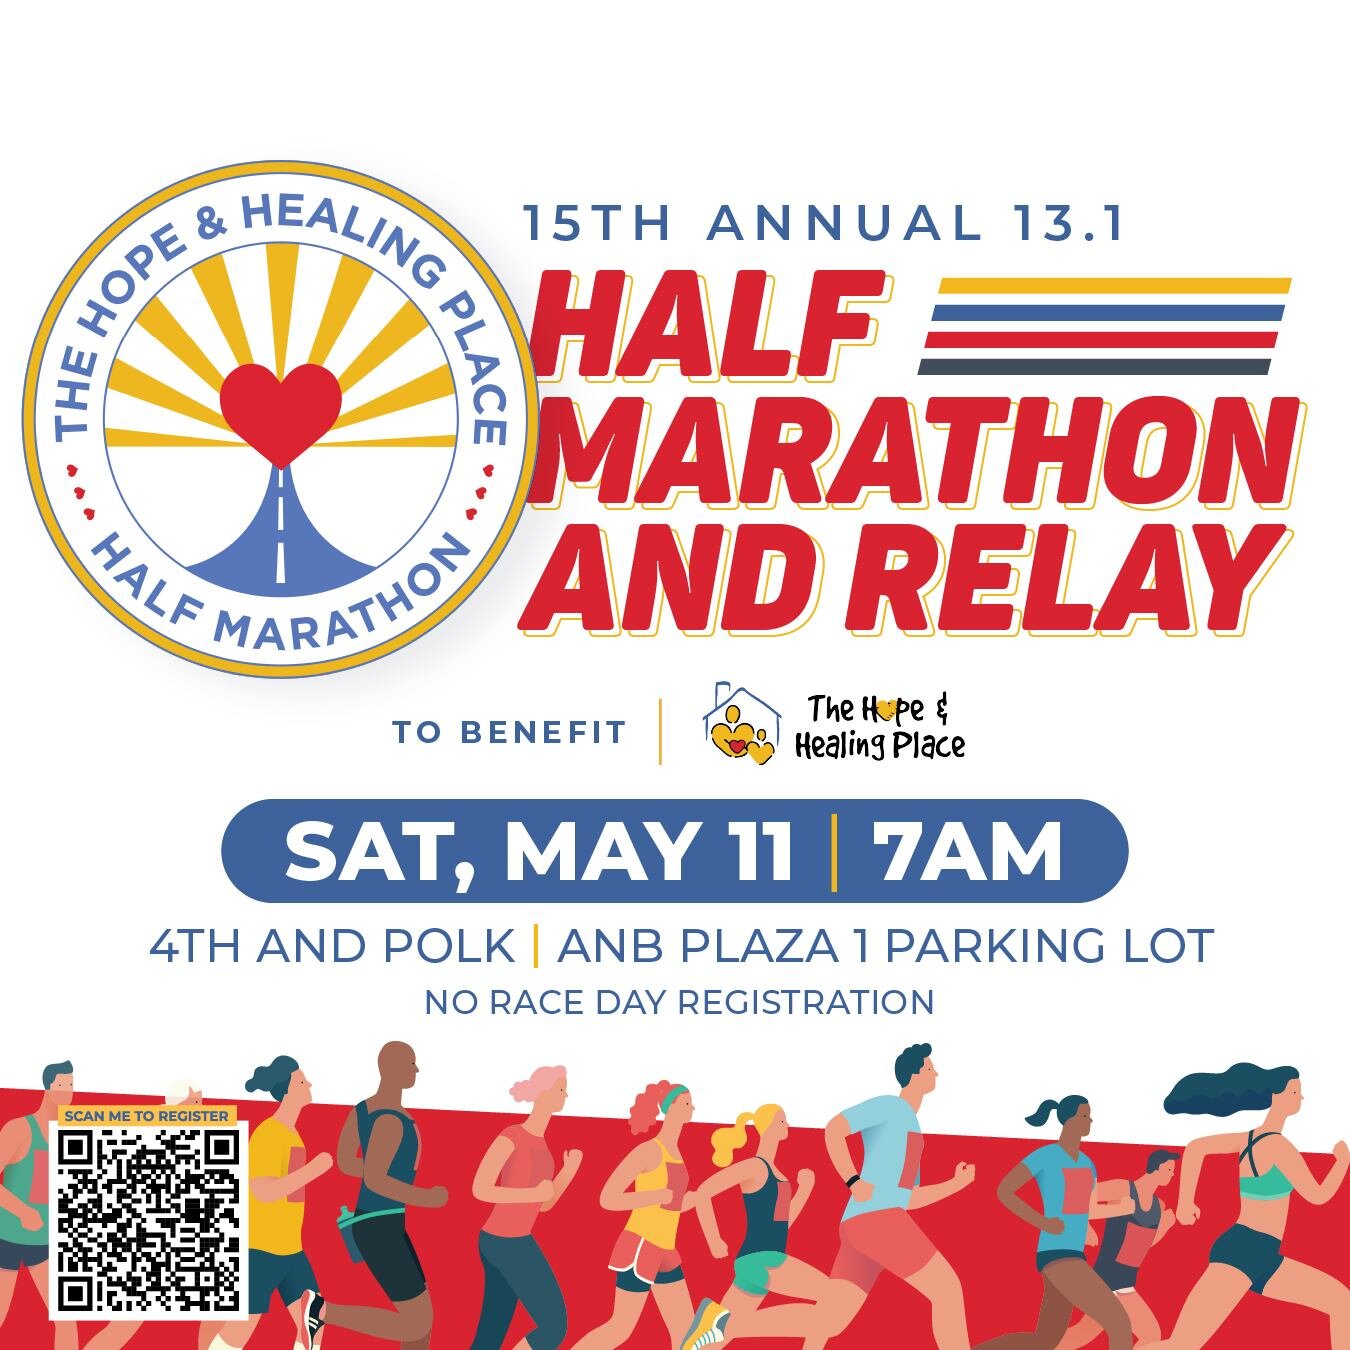 Get ready to tie those laces and join us for our 15th annual half marathon supporting Hope and Healing Place! 

This event is about coming together to remember loved ones and support our community with free grief resources. Whether you're running to 